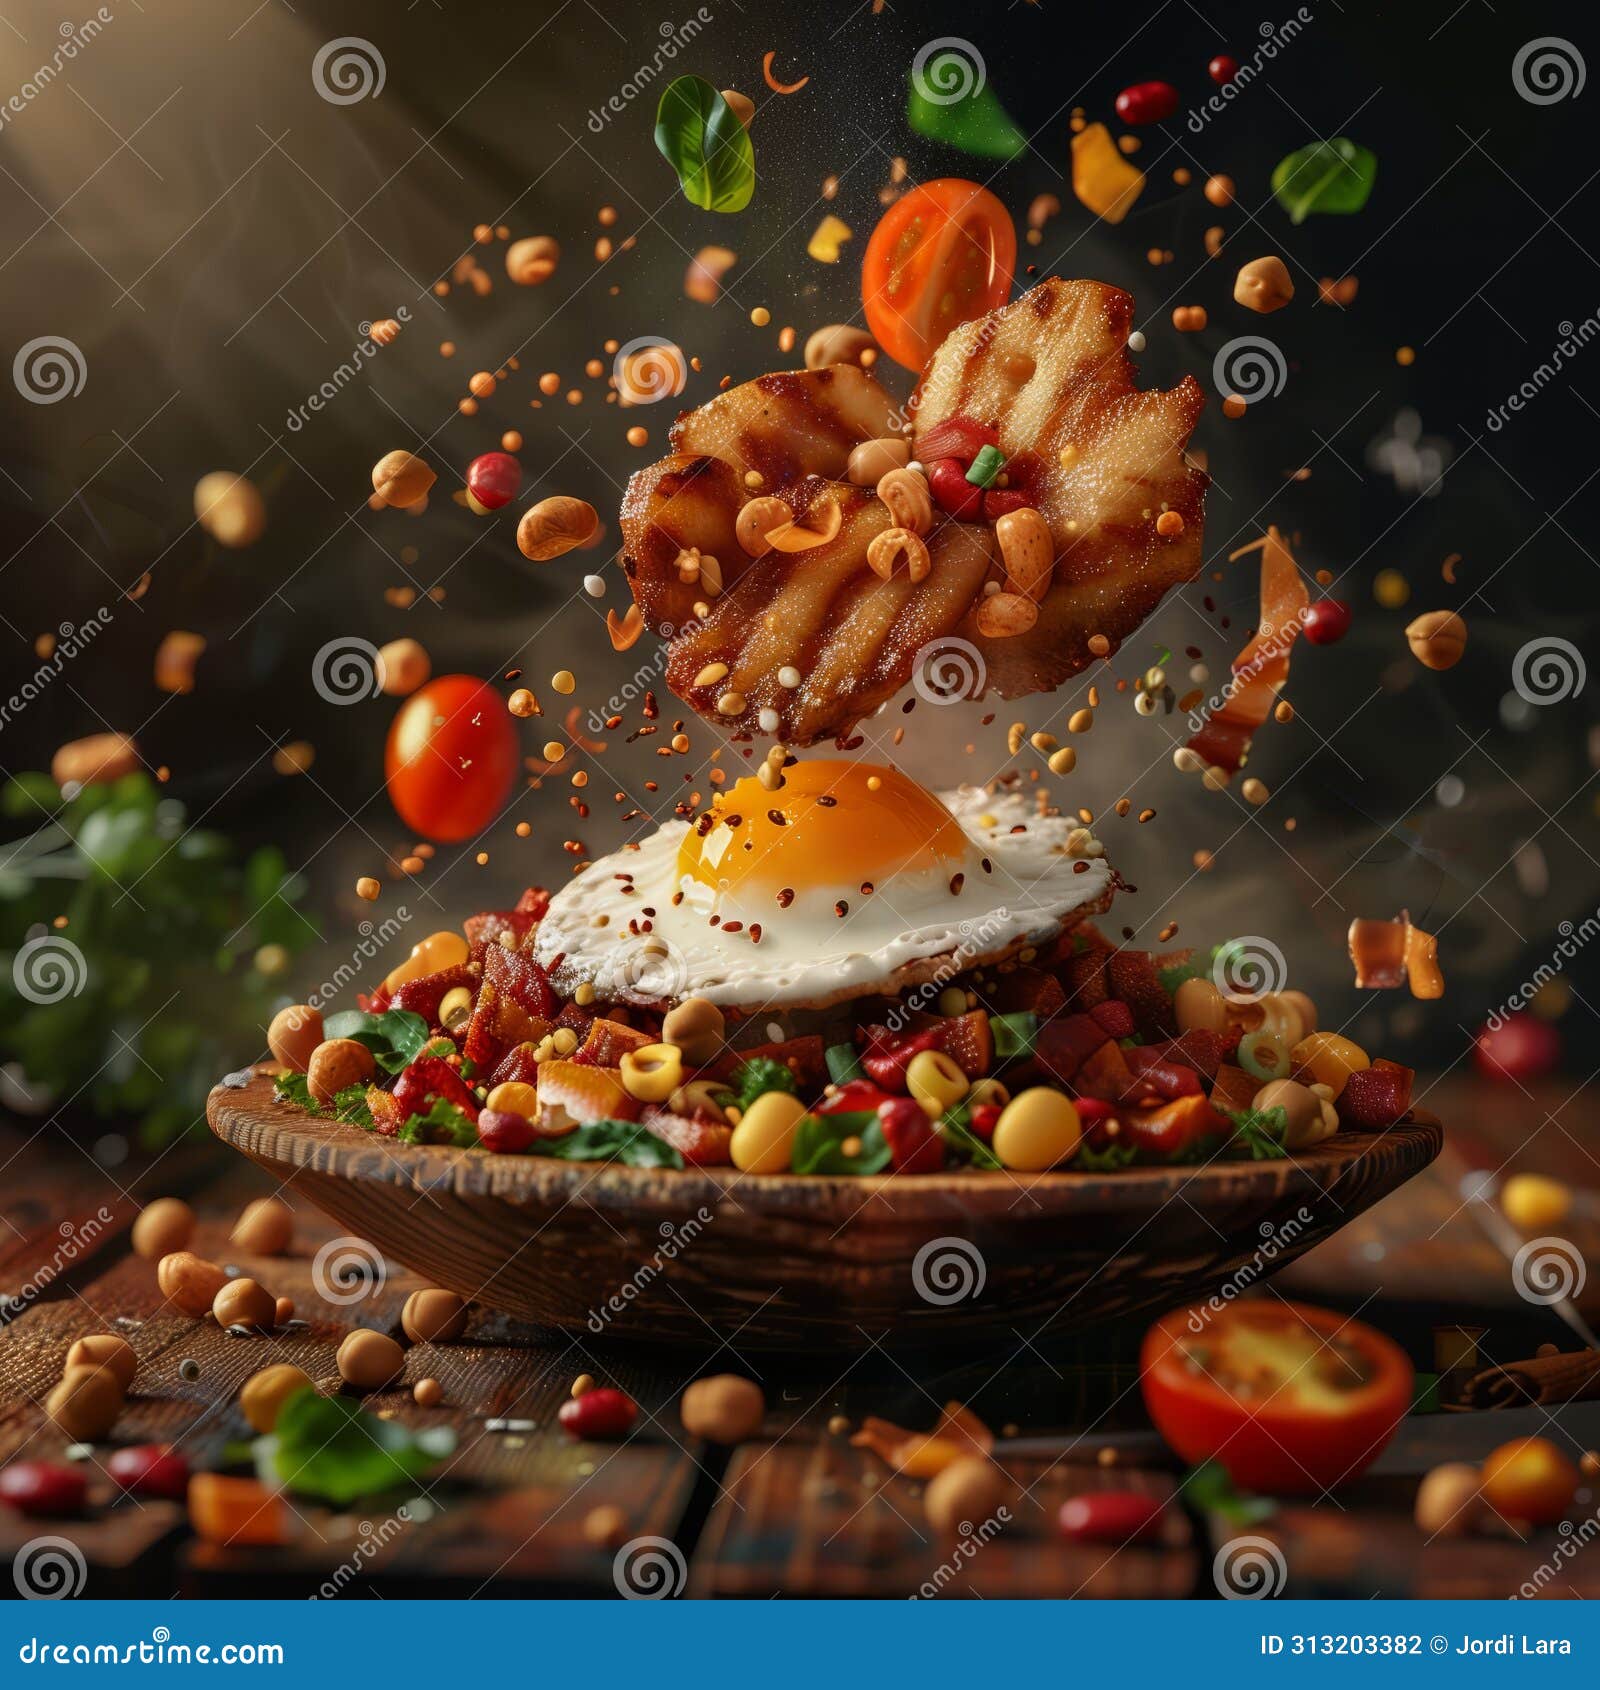 delicious bandeja paisa floating in the air, professional food photography, studio background, advertising photography, cooking